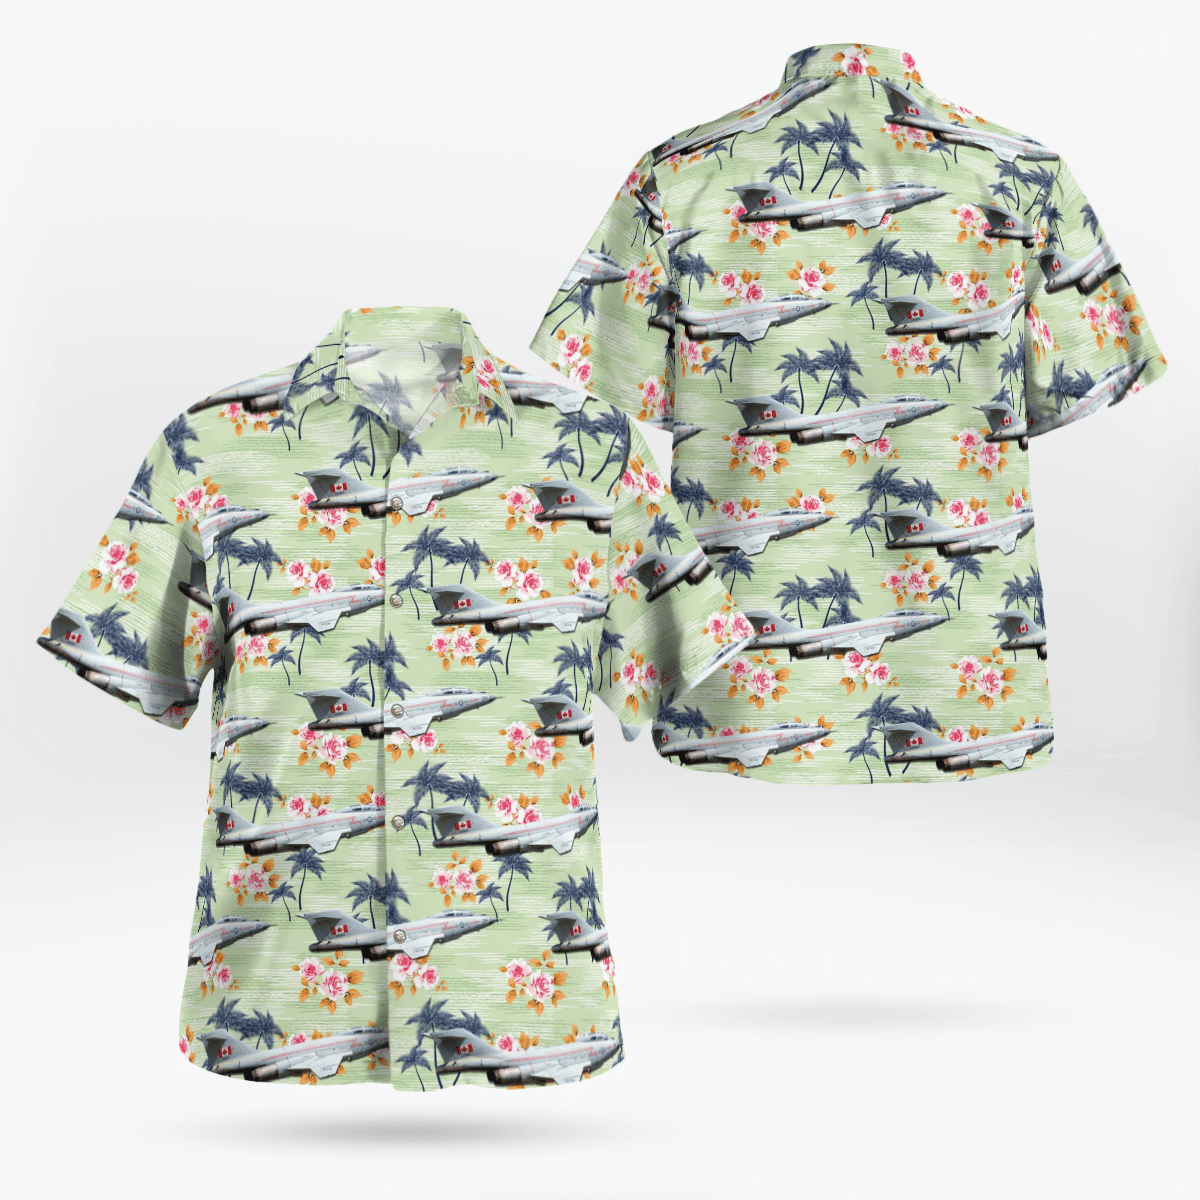 Shop now to find the perfect Hawaii Shirt for your hobby 152